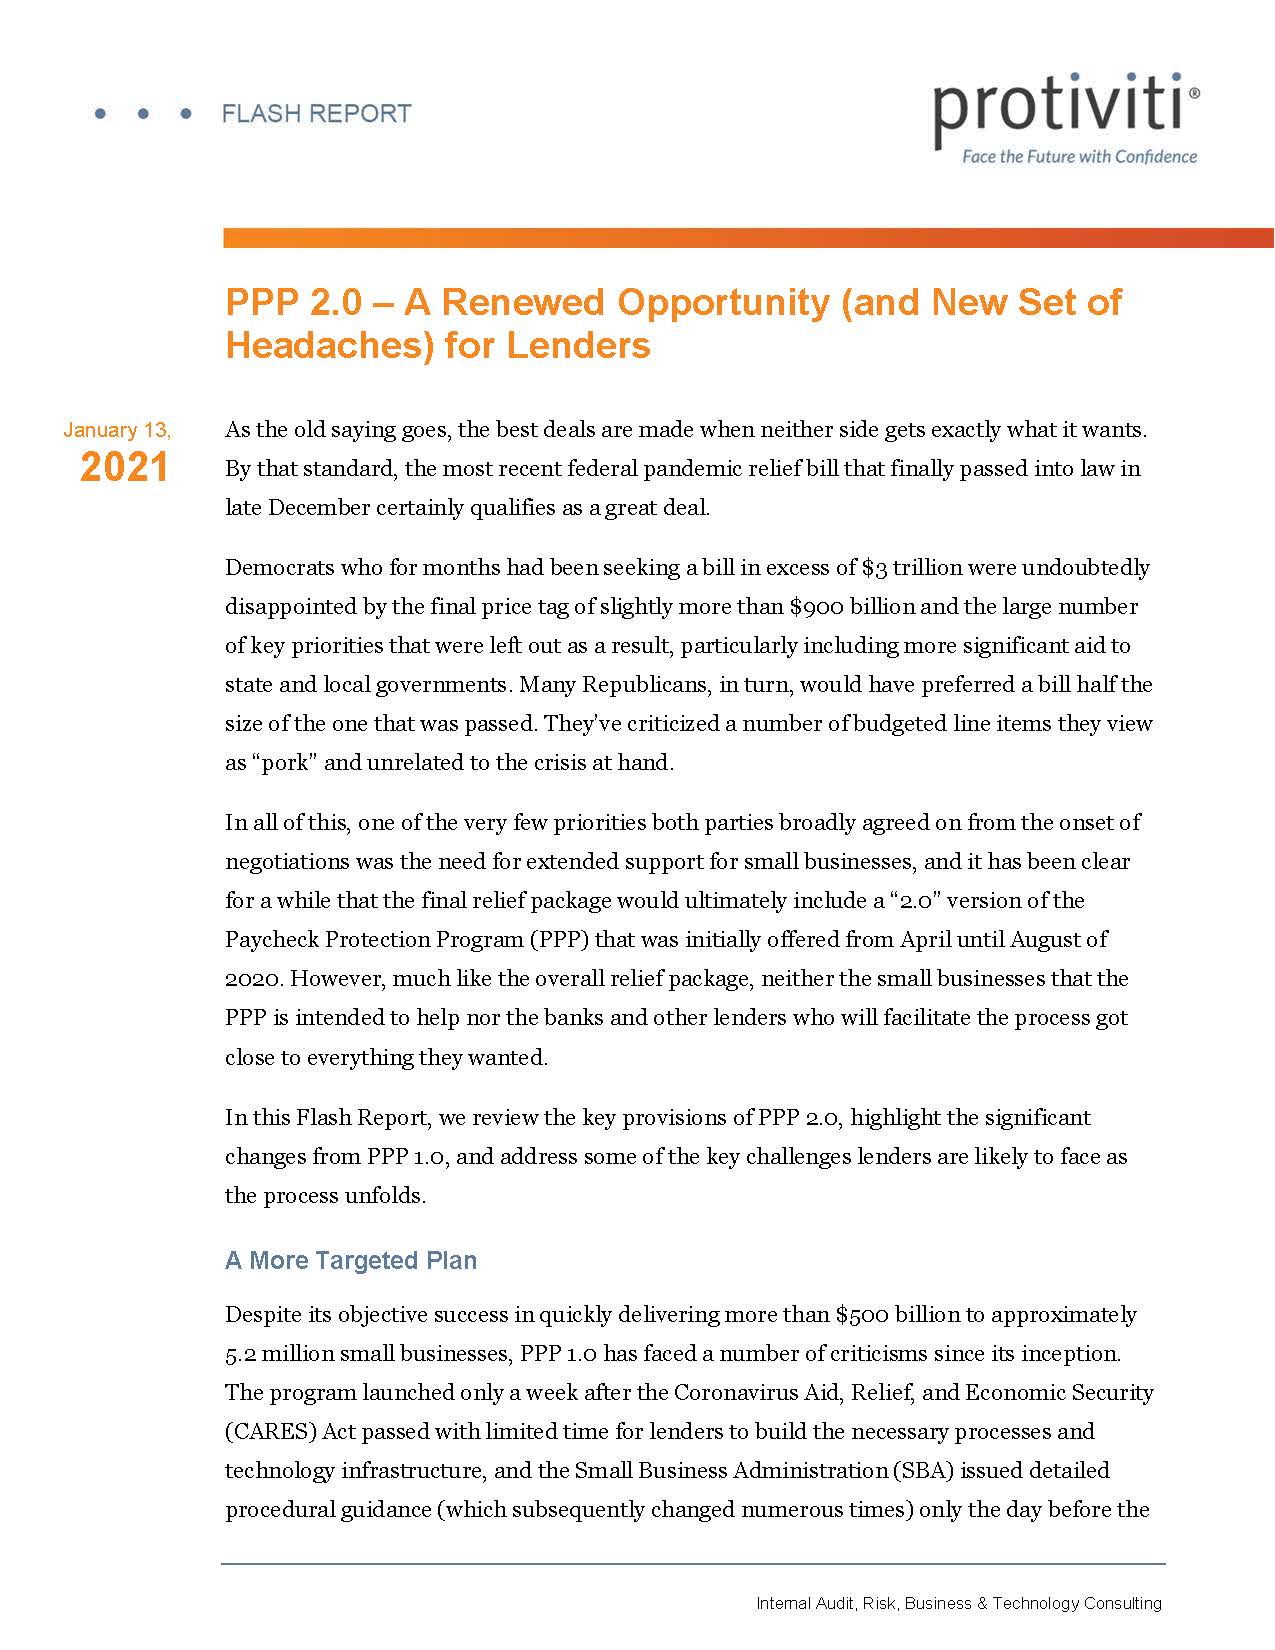 Screenshot of the first page of PPP 2.0 – A Renewed Opportunity (and New Set of Headaches) for Lenders